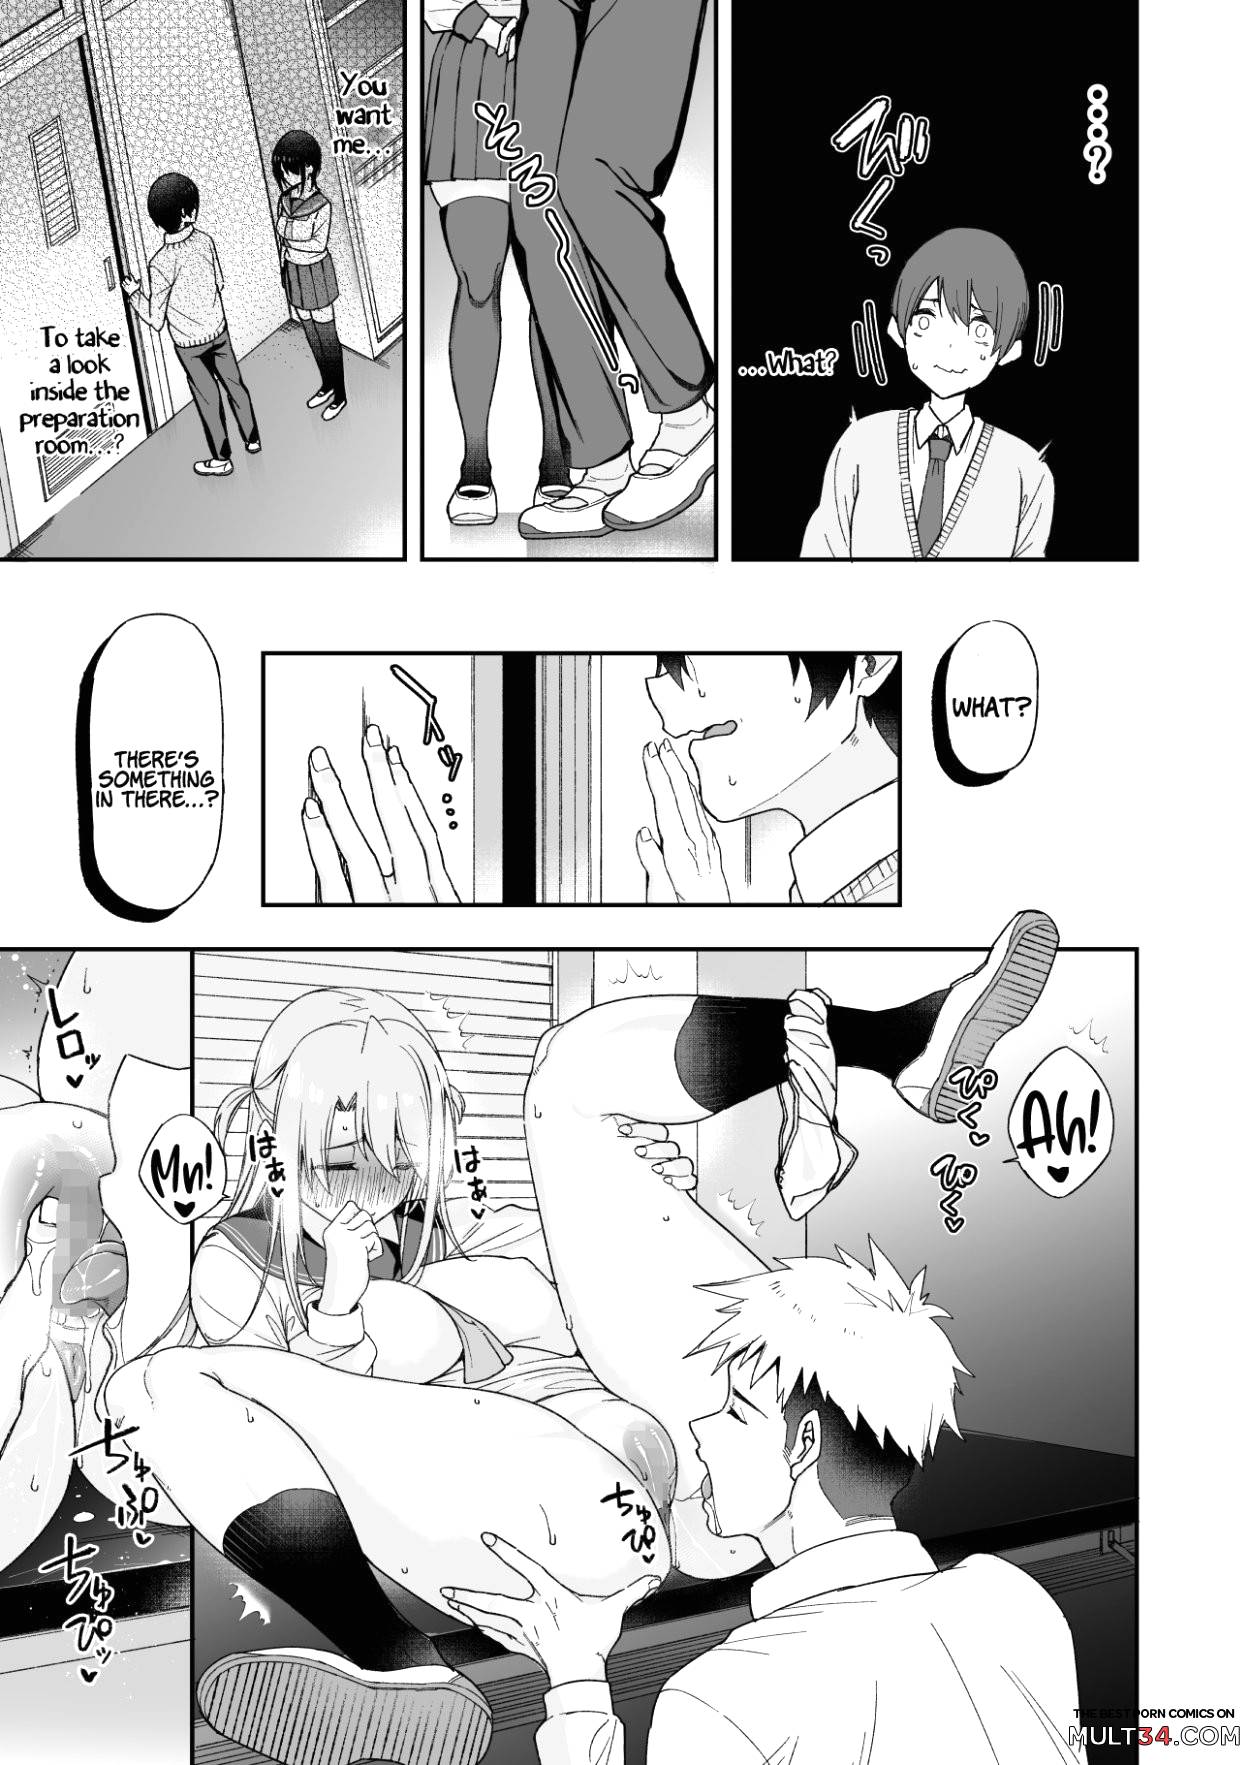 Because my Older Childhood Friend was Taken Away from Me, is it Ok for Me to Have Sex with Her Little Sister? page 10